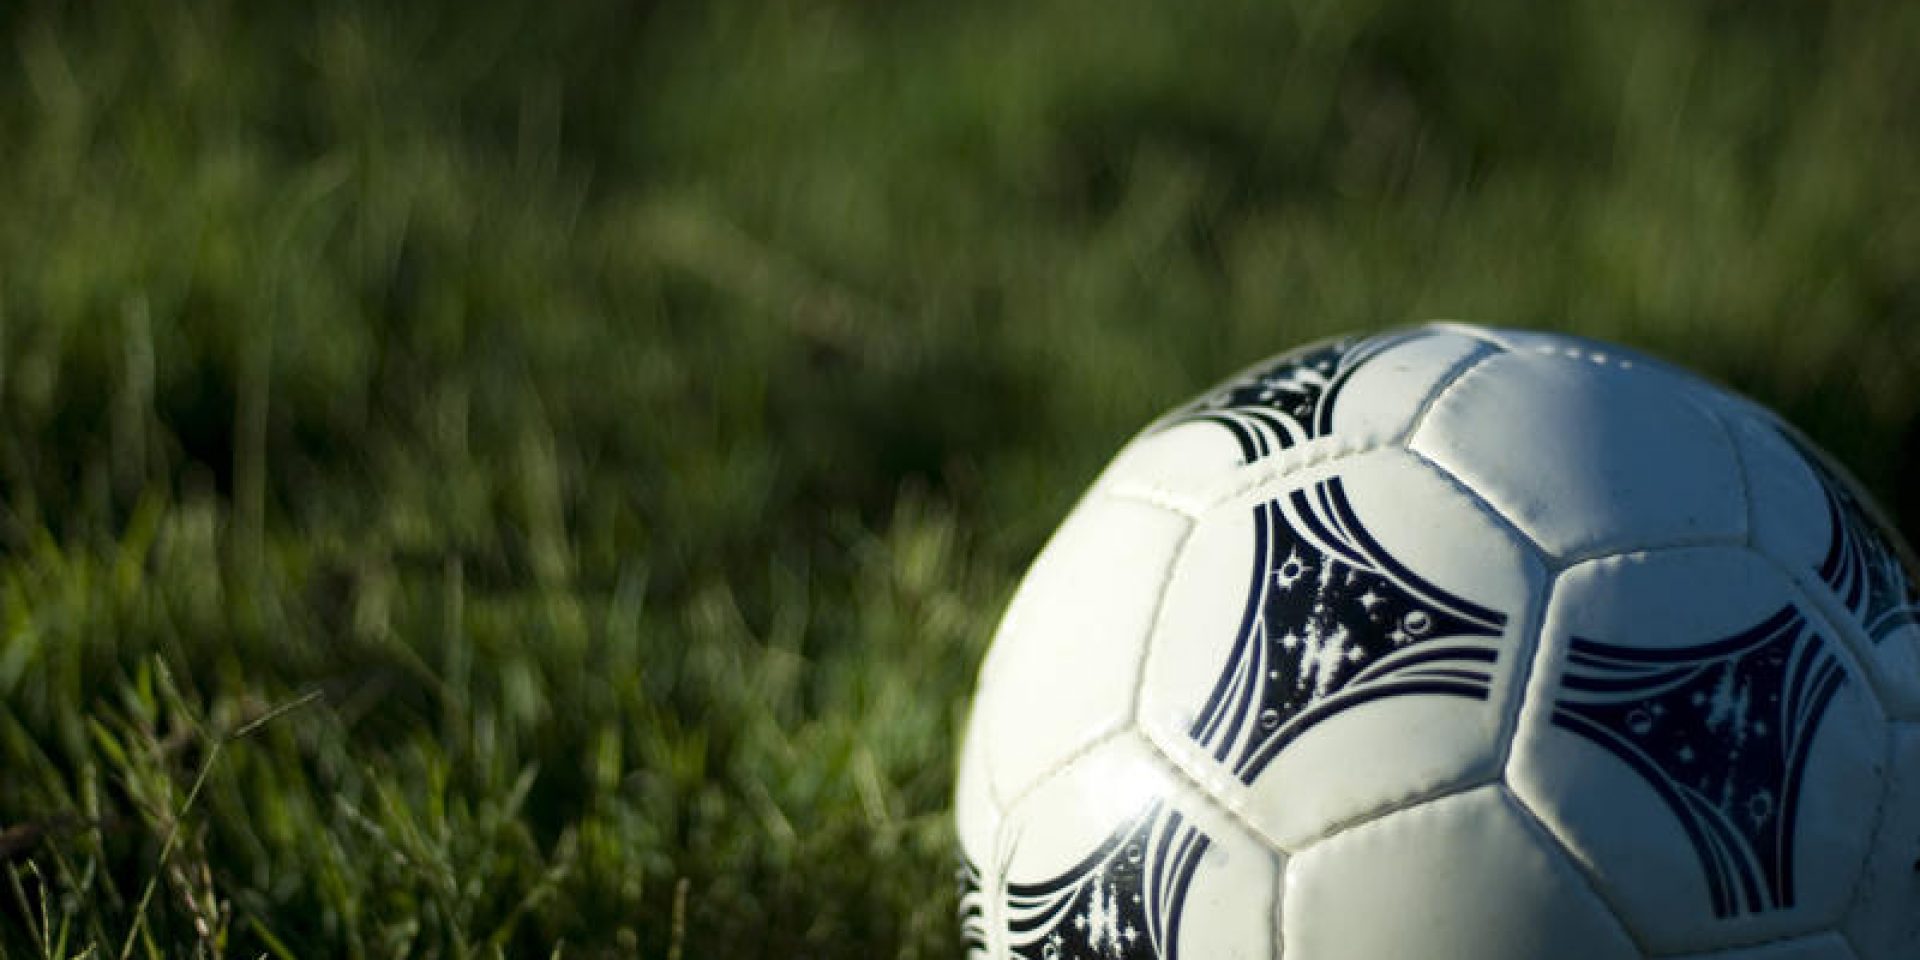 a white leather football on a grassy football pitch